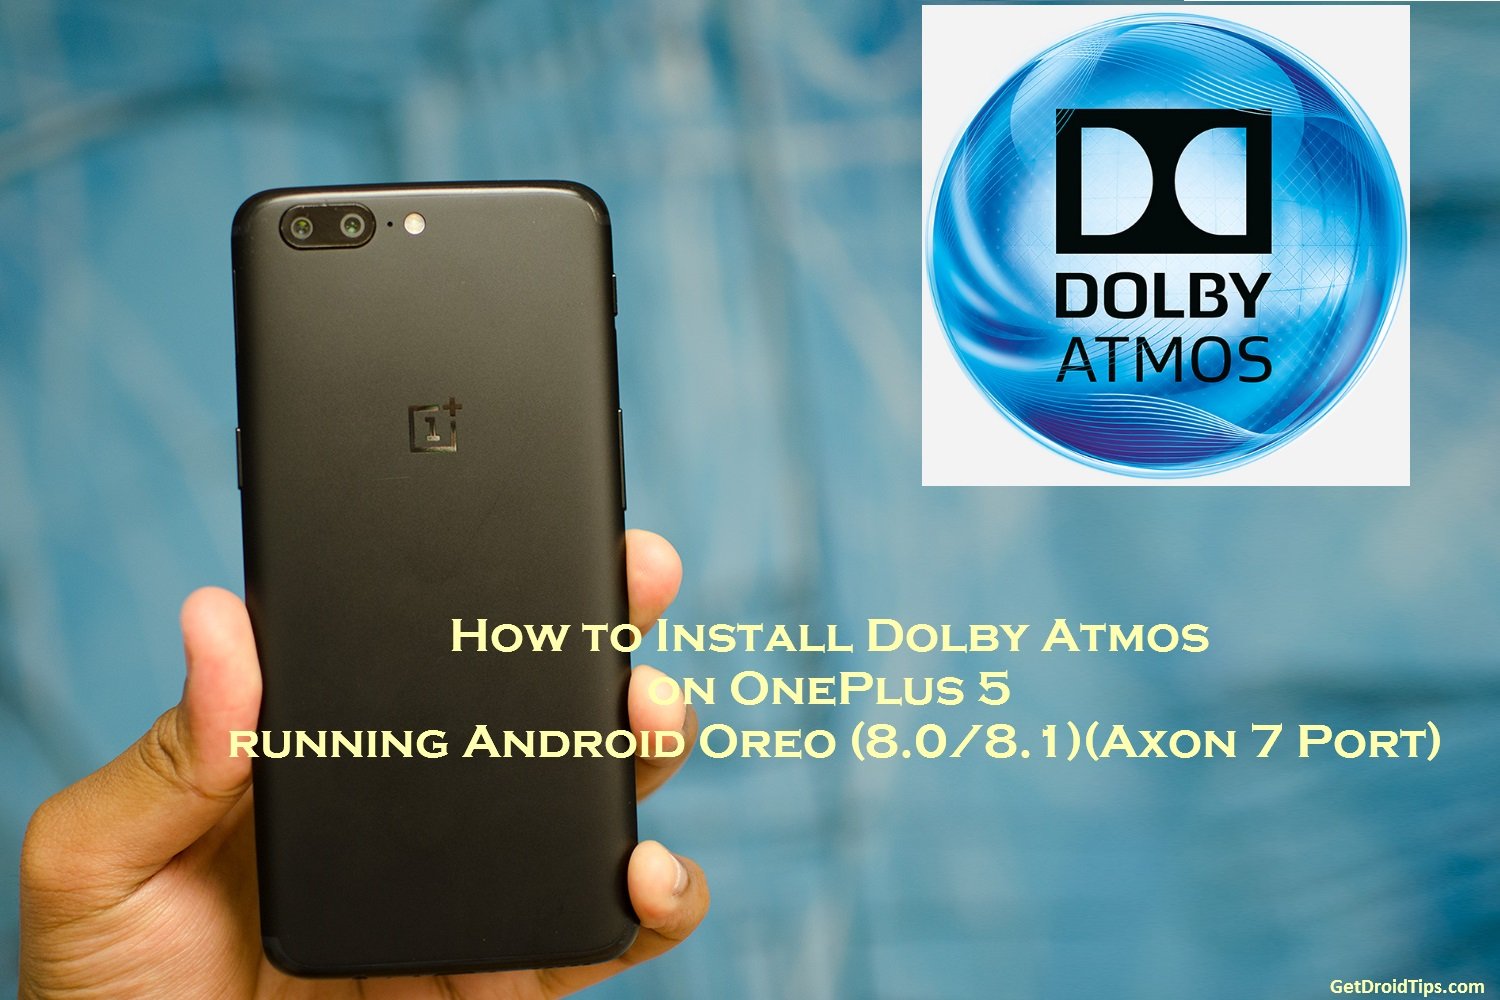 How to Install Dolby Atmos on OnePlus 5 running Android Oreo